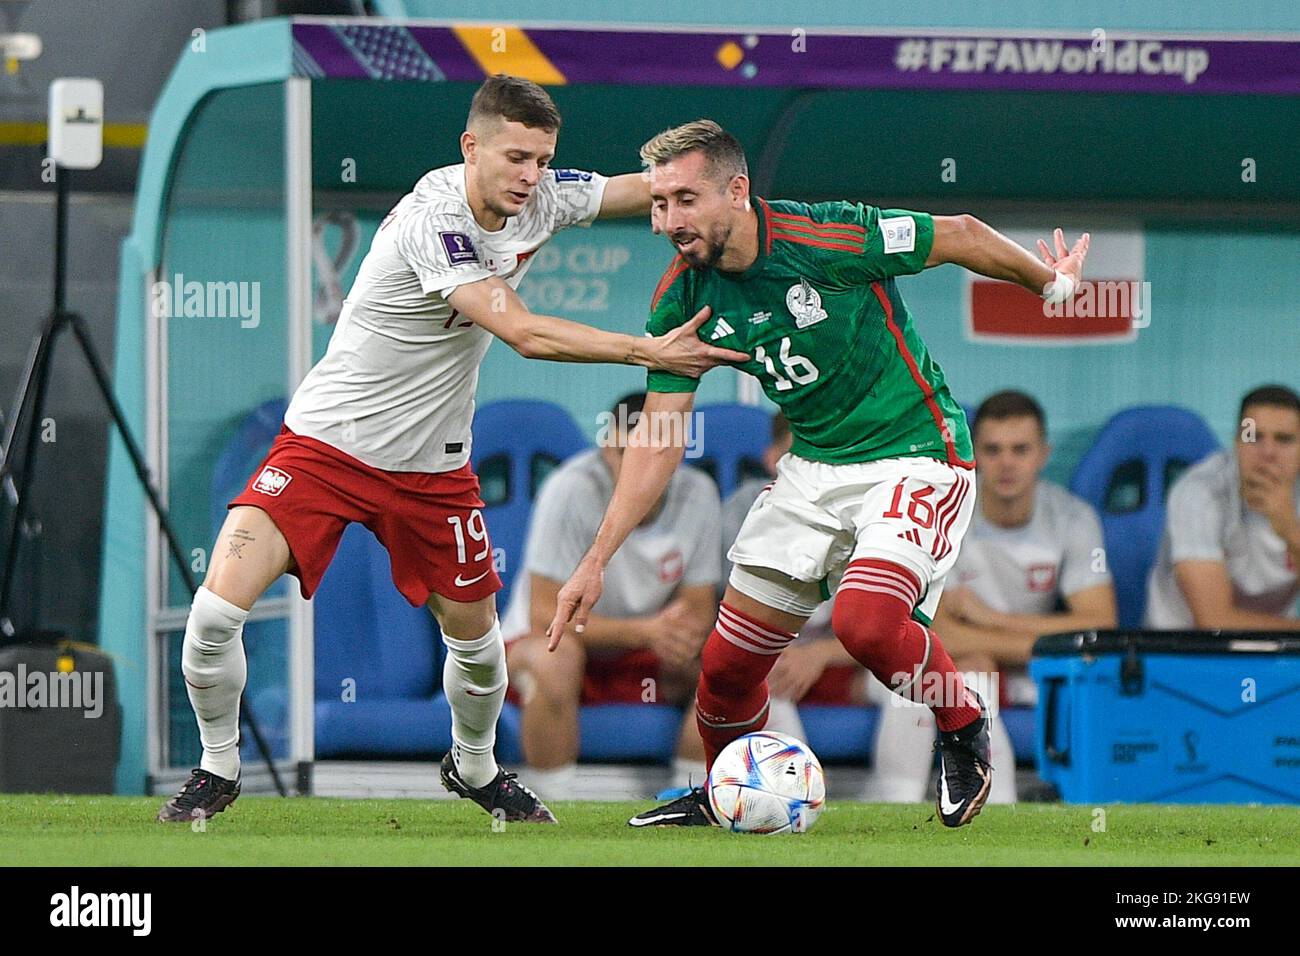 DOHA, QATAR - NOVEMBER 22: Sebastian Szymanski of Poland battles for the ball with Hector Herrera of Mexico during the Group C - FIFA World Cup Qatar 2022 match between Mexico and Poland at Stadium 974 on November 22, 2022 in Doha, Qatar (Photo by Pablo Morano/BSR Agency) Credit: BSR Agency/Alamy Live News Credit: BSR Agency/Alamy Live News Stock Photo